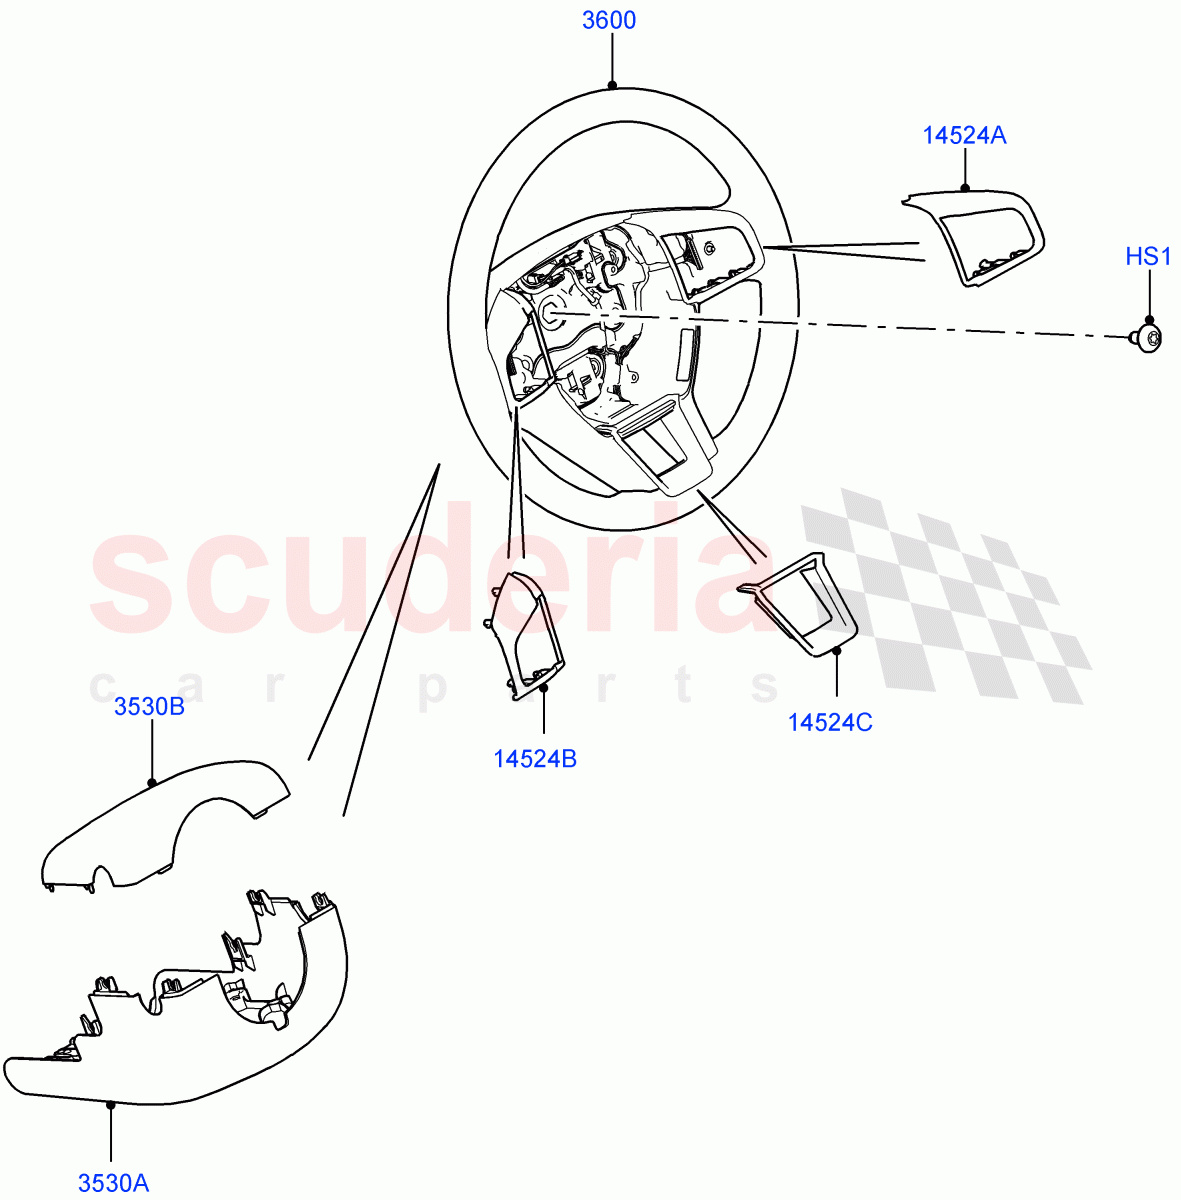 Steering Wheel(Changsu (China))((V)FROMFG000001,(V)TOKG446856) of Land Rover Land Rover Discovery Sport (2015+) [2.0 Turbo Diesel]